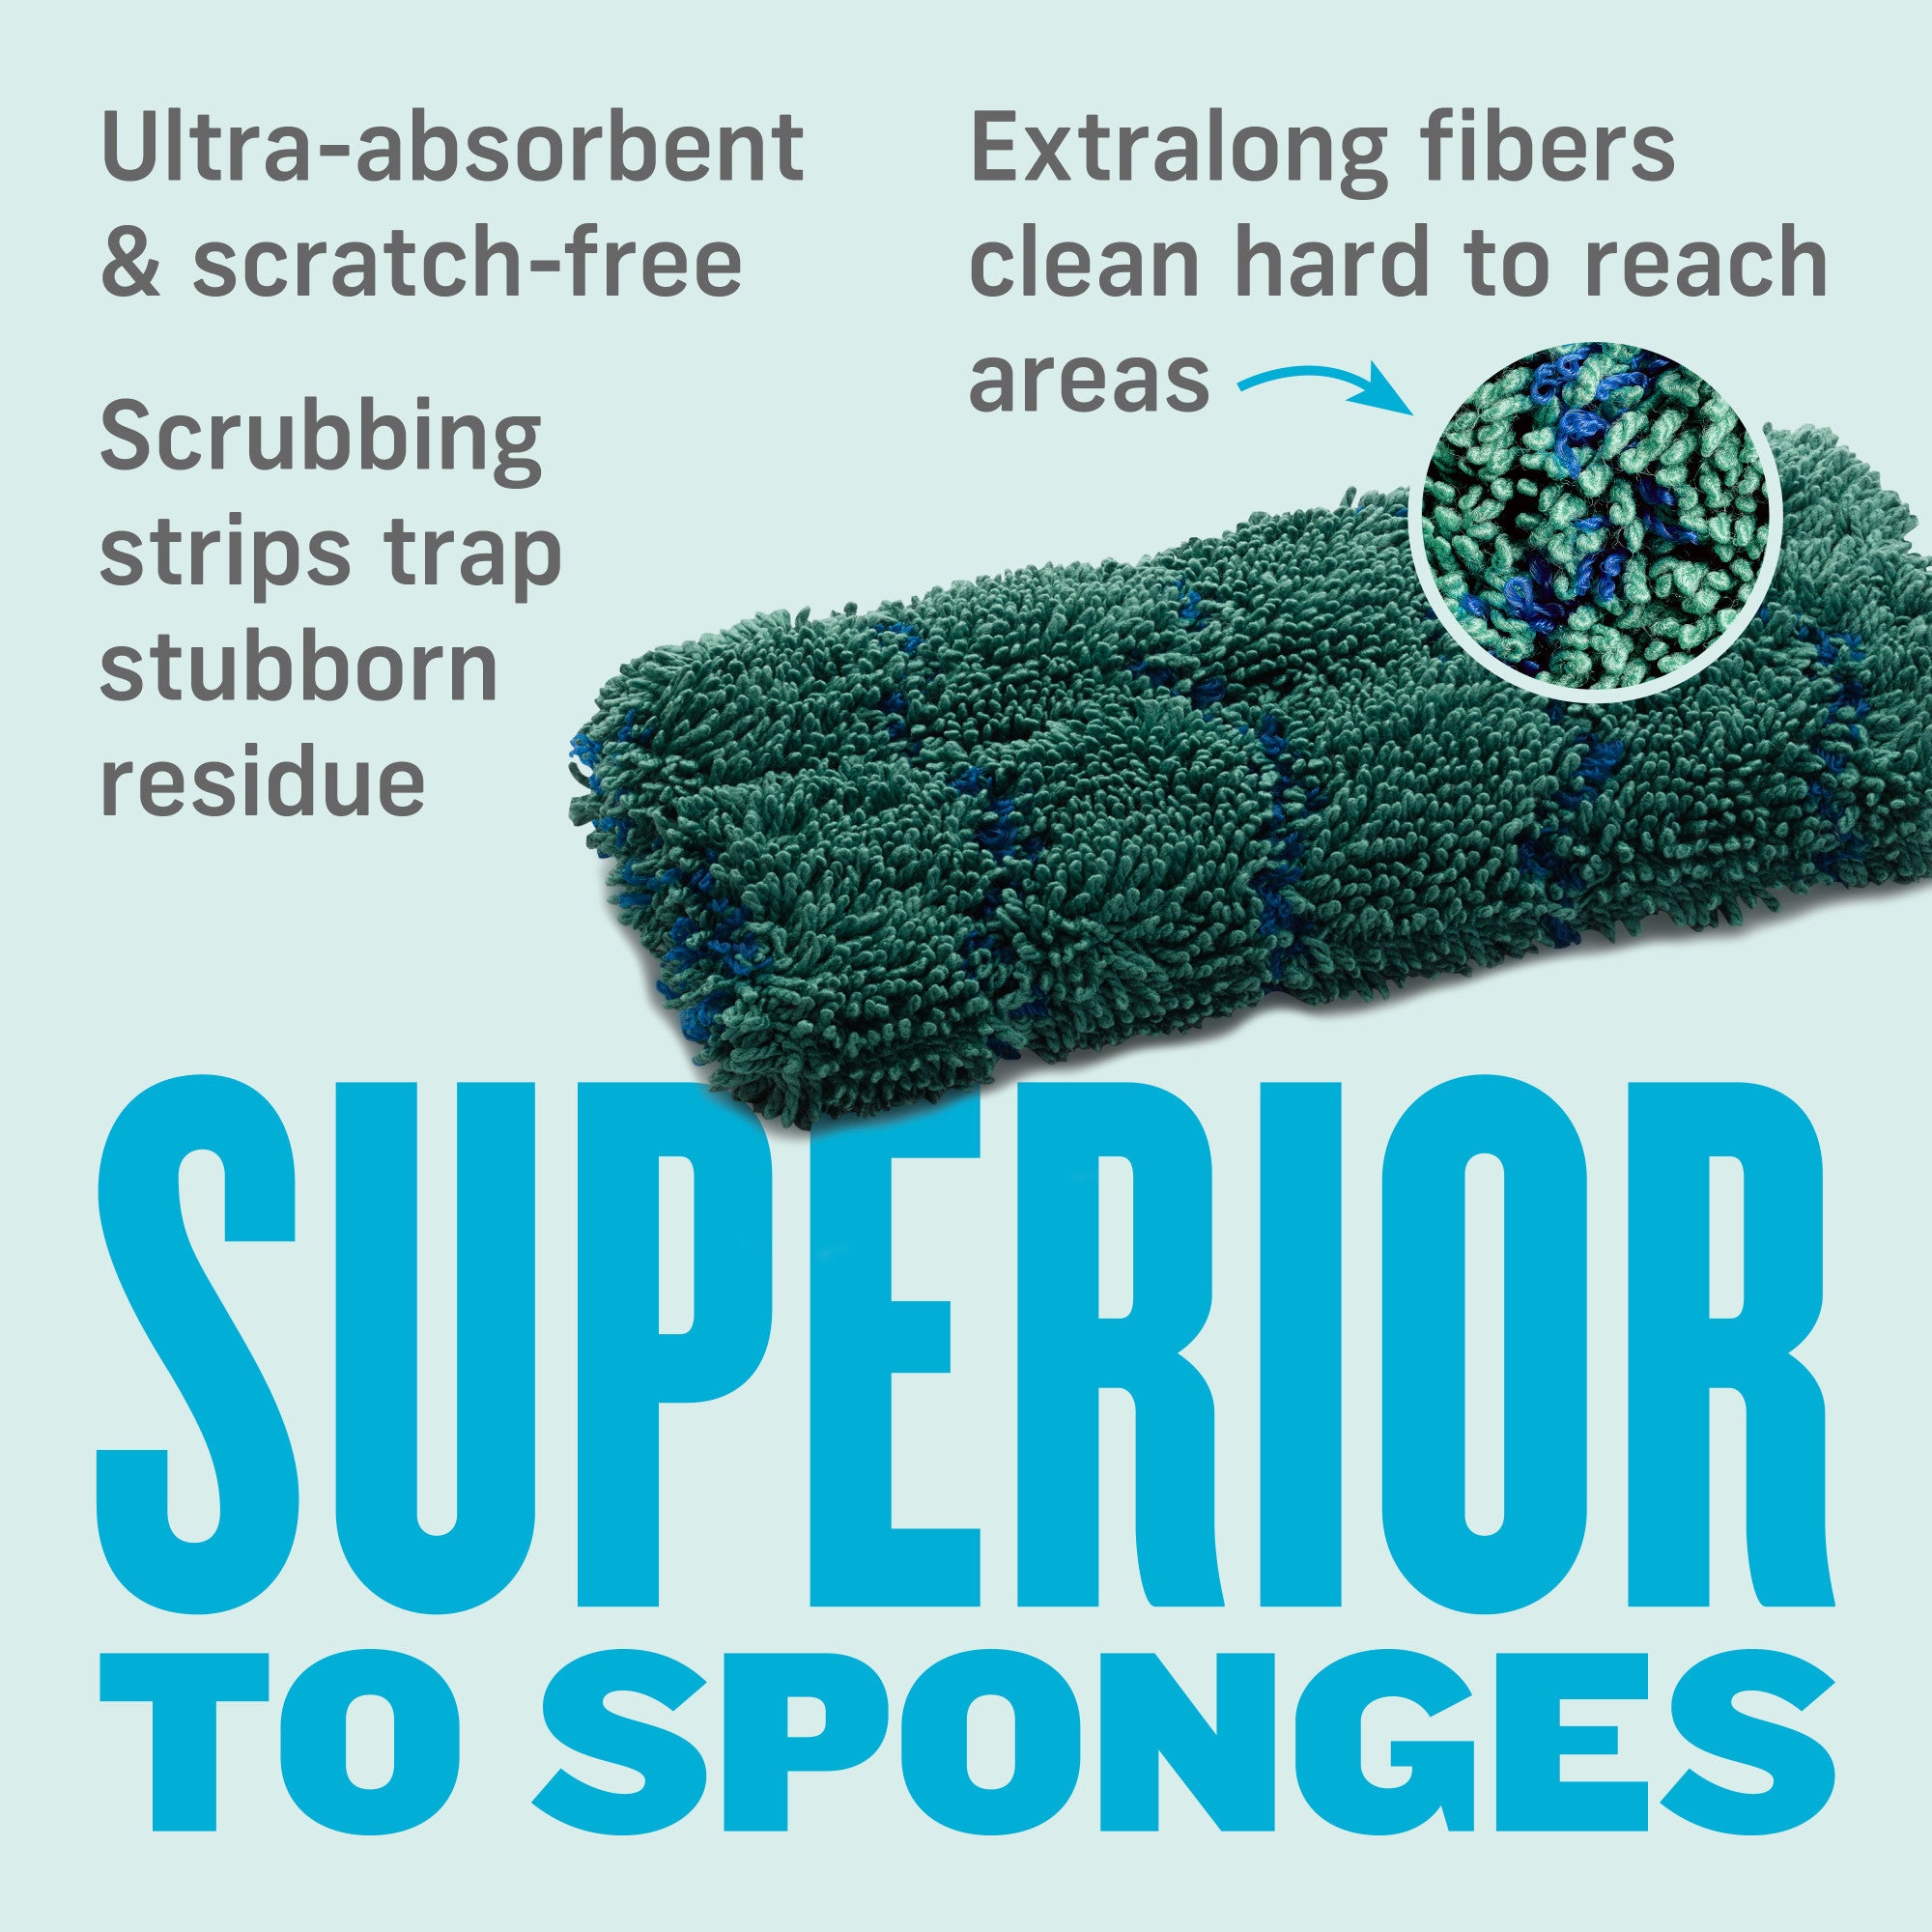 How to Use Sponge Cloth to Clean